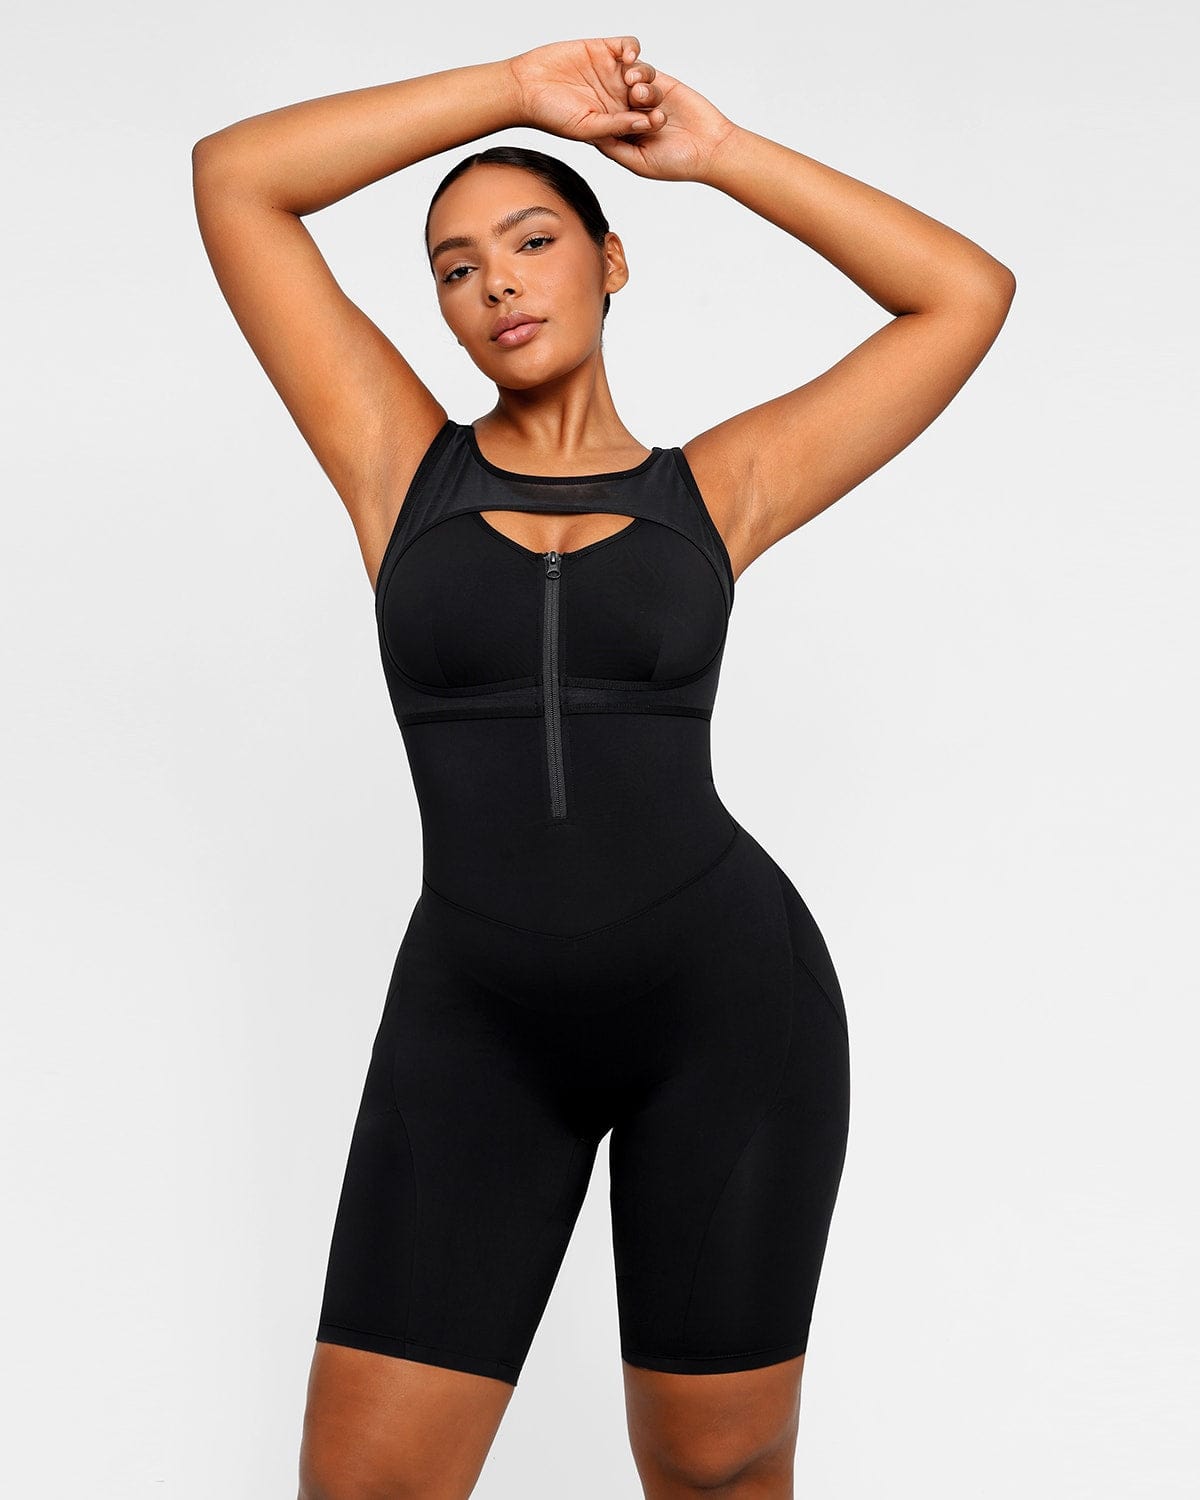 Sexy Plus Size Bodysuit With Open Crotch And Seamless Thong For Women  Slimming Womens Body Slimming Bodysuit Jumpsuit In U Back Shape XxxL From  Alymall, $12.95